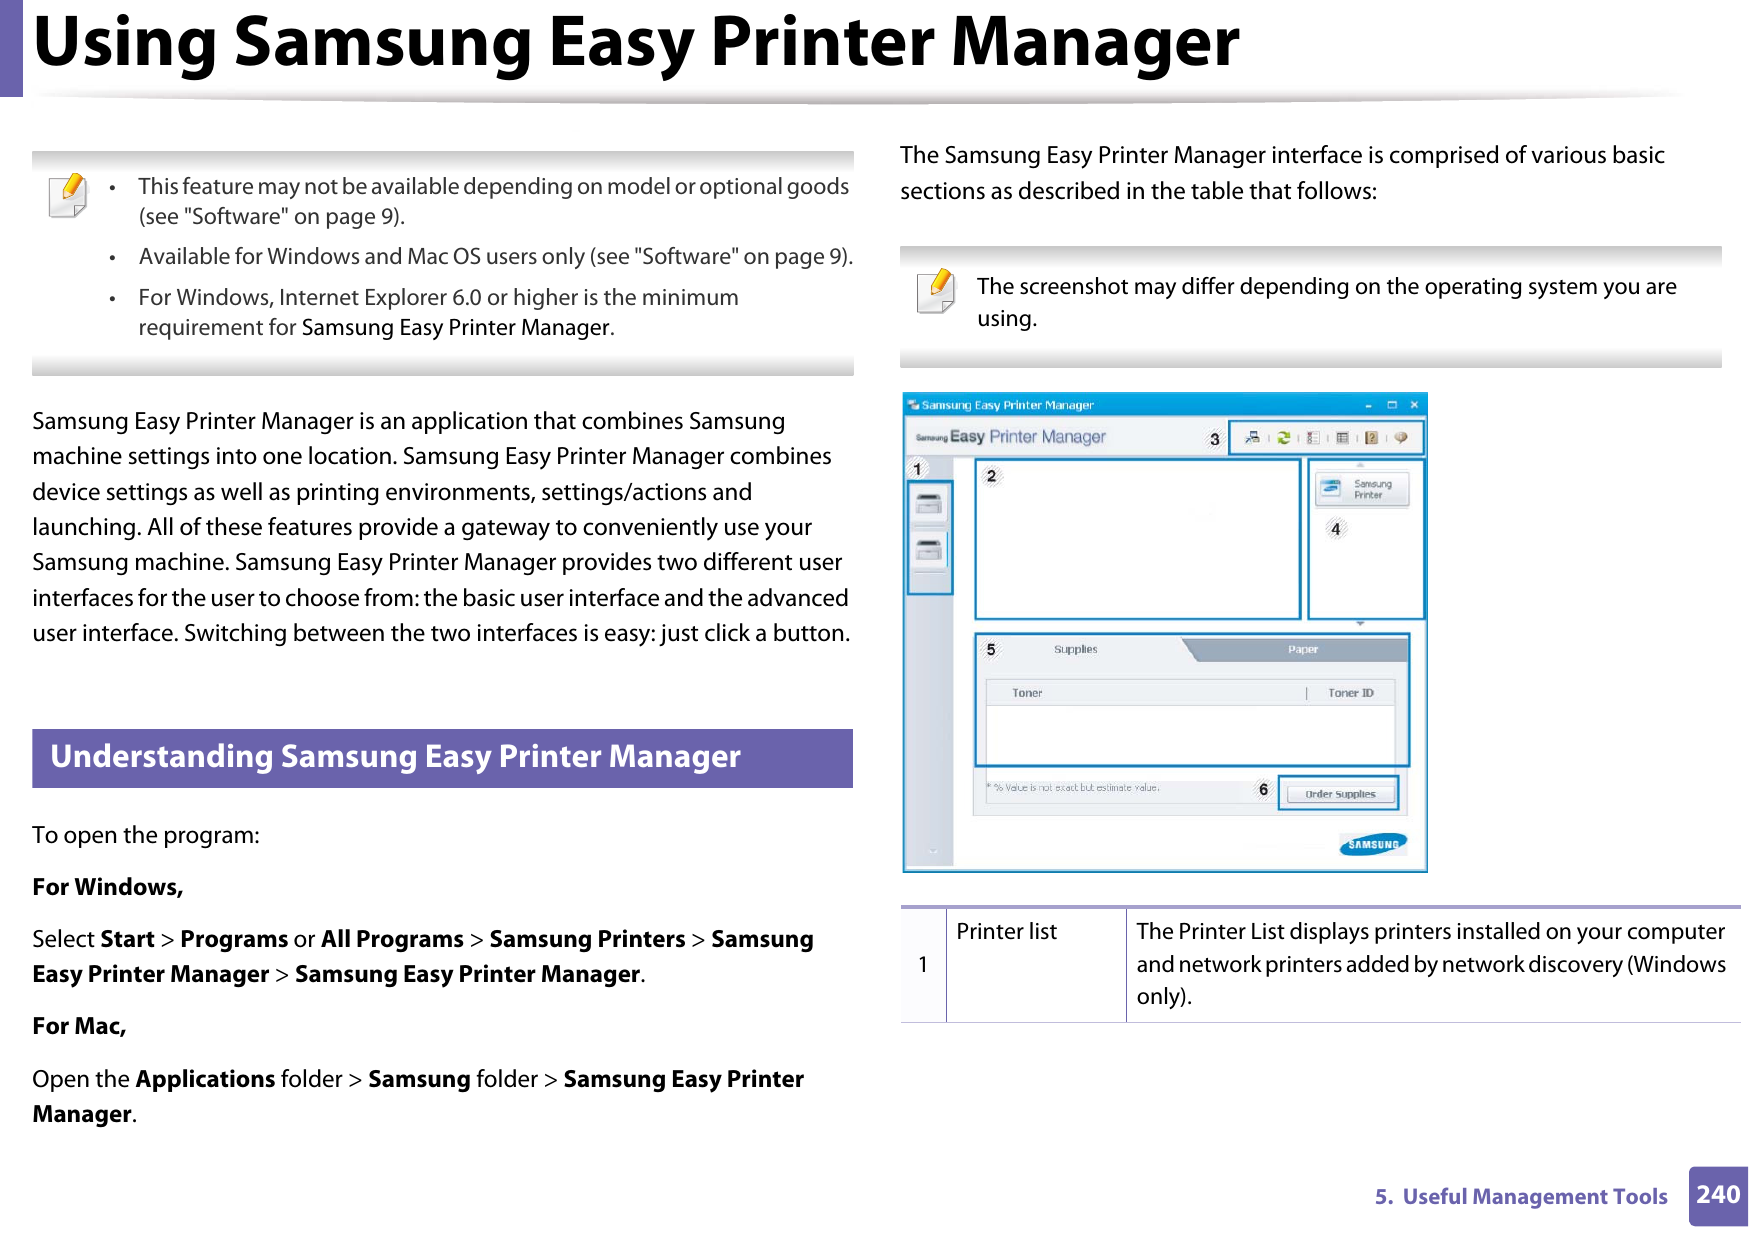 2405.  Useful Management ToolsUsing Samsung Easy Printer Manager  • This feature may not be available depending on model or optional goods (see &quot;Software&quot; on page 9).• Available for Windows and Mac OS users only (see &quot;Software&quot; on page 9).• For Windows, Internet Explorer 6.0 or higher is the minimum requirement for Samsung Easy Printer Manager. Samsung Easy Printer Manager is an application that combines Samsung machine settings into one location. Samsung Easy Printer Manager combines device settings as well as printing environments, settings/actions and launching. All of these features provide a gateway to conveniently use your Samsung machine. Samsung Easy Printer Manager provides two different user interfaces for the user to choose from: the basic user interface and the advanced user interface. Switching between the two interfaces is easy: just click a button.5 Understanding Samsung Easy Printer ManagerTo open the program: For Windows,Select Start &gt; Programs or All Programs &gt; Samsung Printers &gt; Samsung Easy Printer Manager &gt; Samsung Easy Printer Manager.For Mac,Open the Applications folder &gt; Samsung folder &gt; Samsung Easy Printer Manager.The Samsung Easy Printer Manager interface is comprised of various basic sections as described in the table that follows: The screenshot may differ depending on the operating system you are using. 1Printer list The Printer List displays printers installed on your computer and network printers added by network discovery (Windows only).